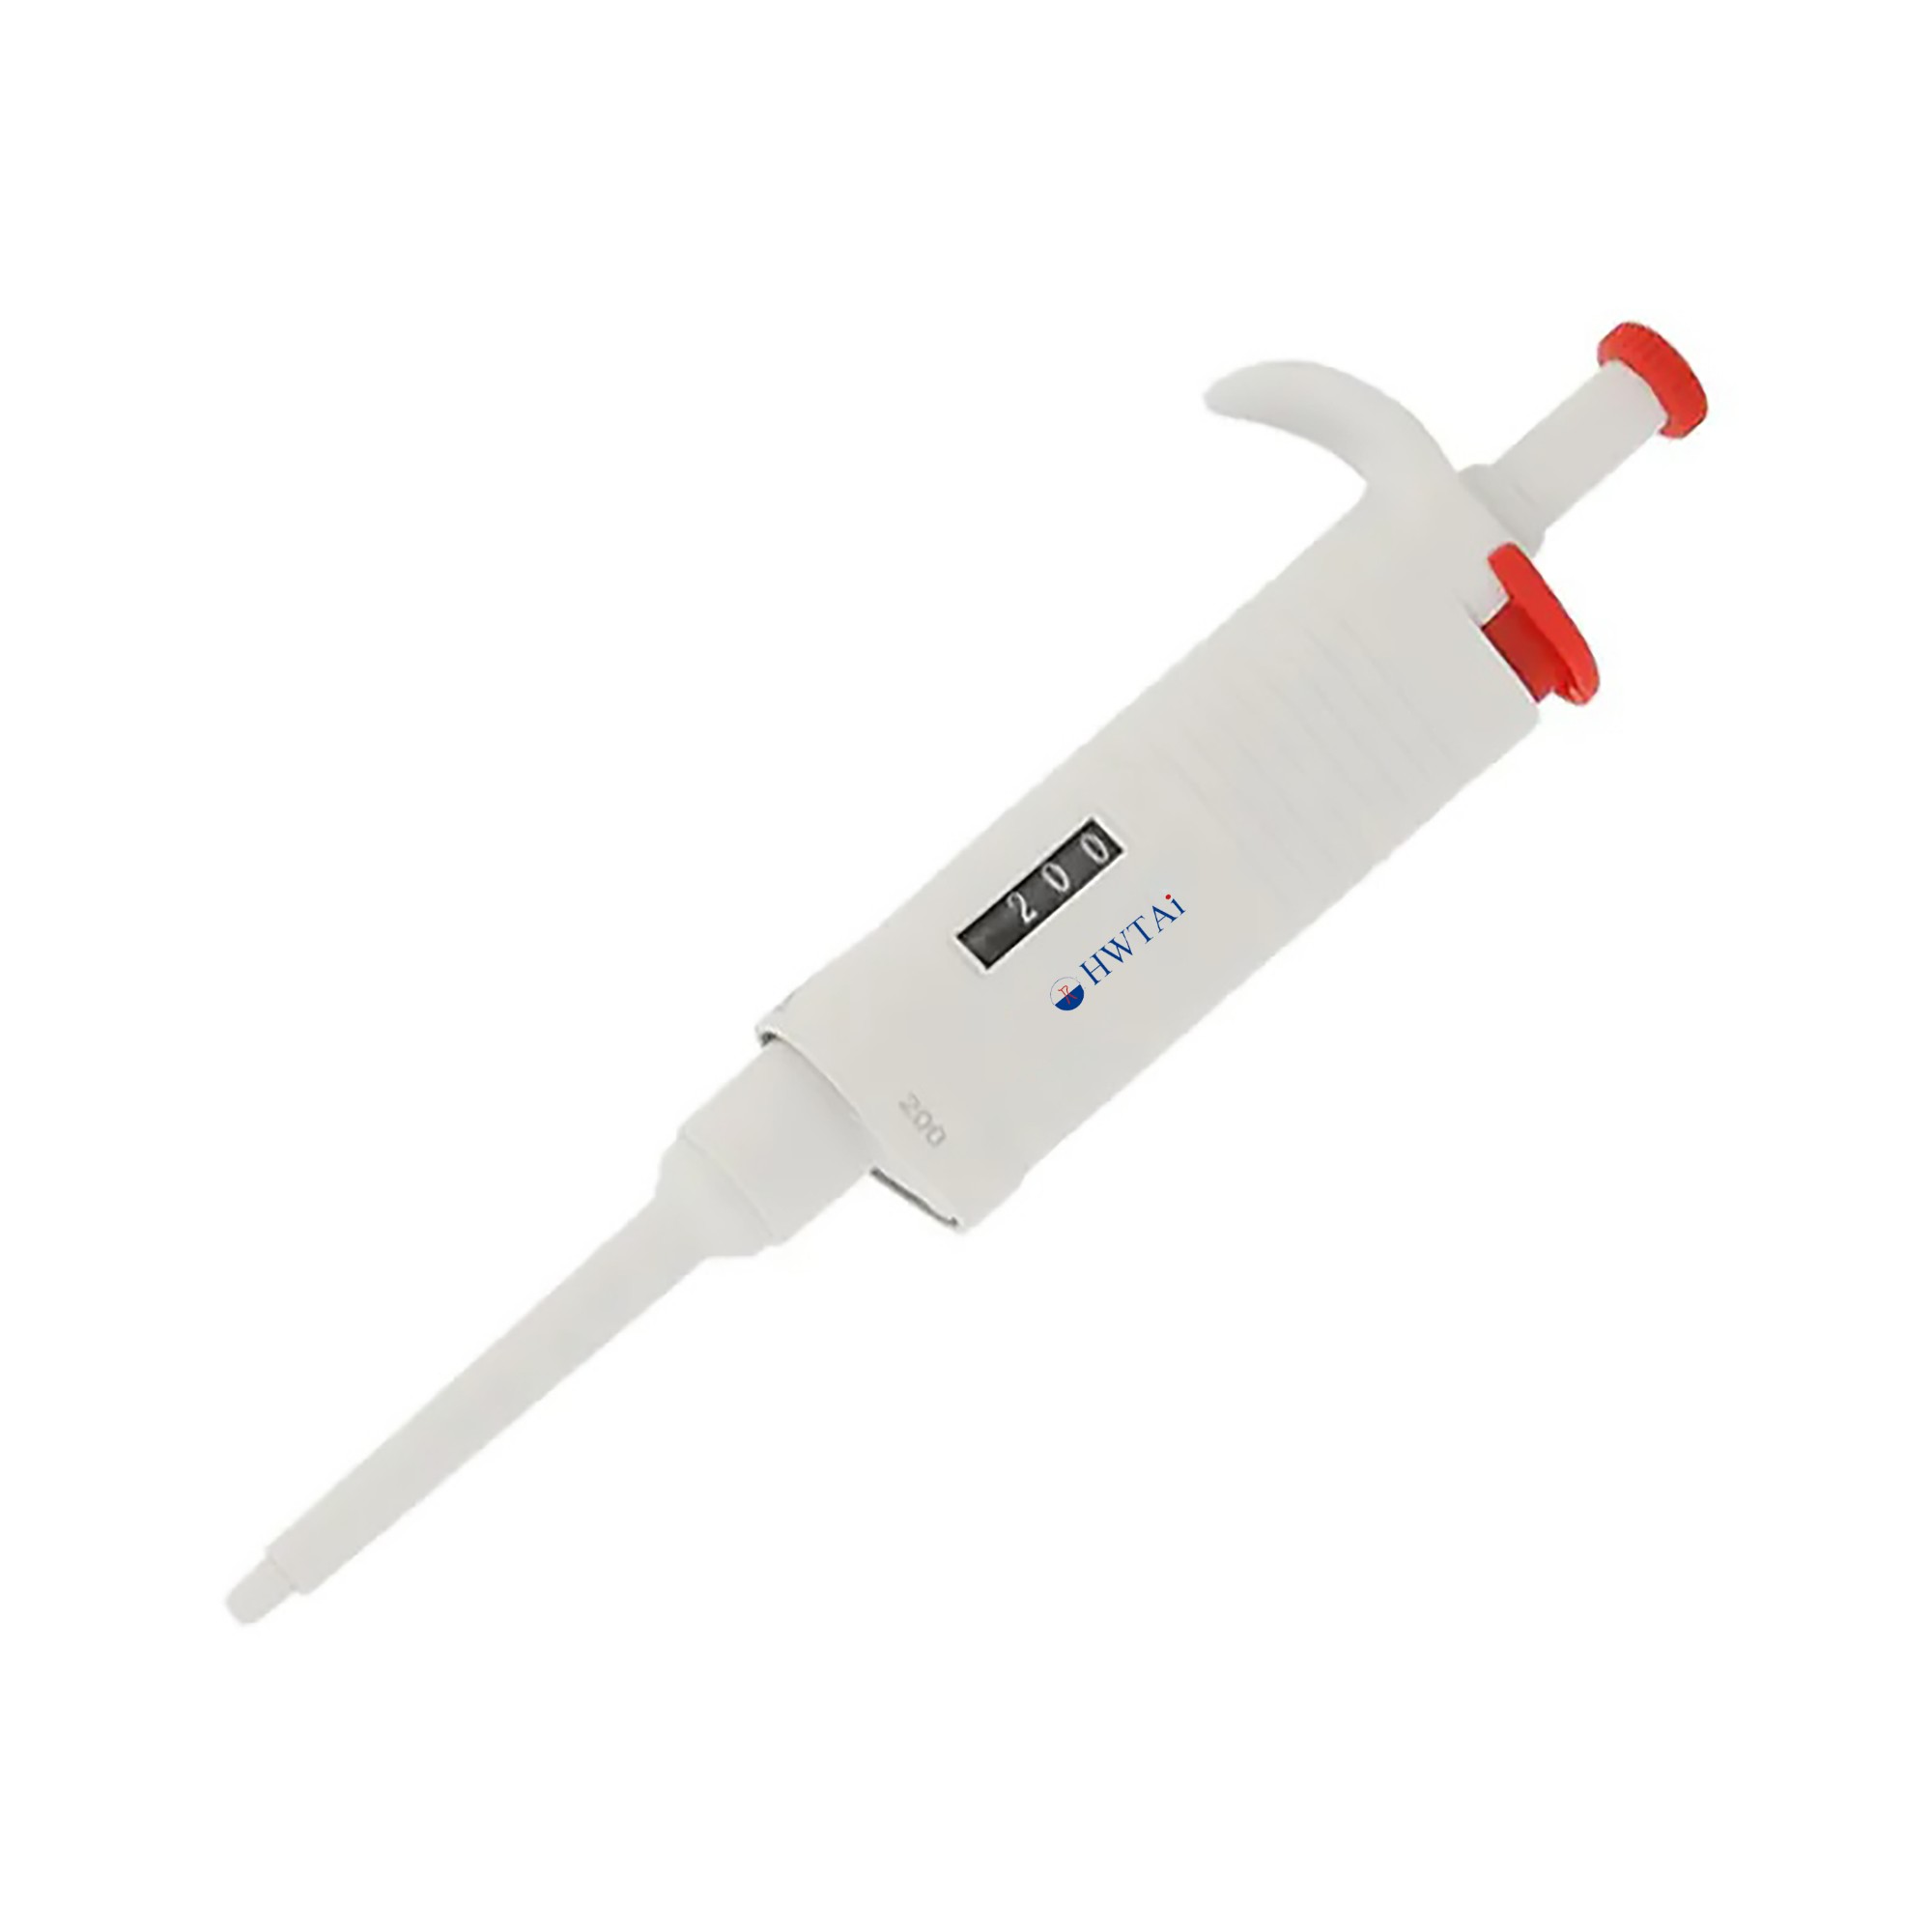 5th Single (Adjustable variable) channel pipettes 